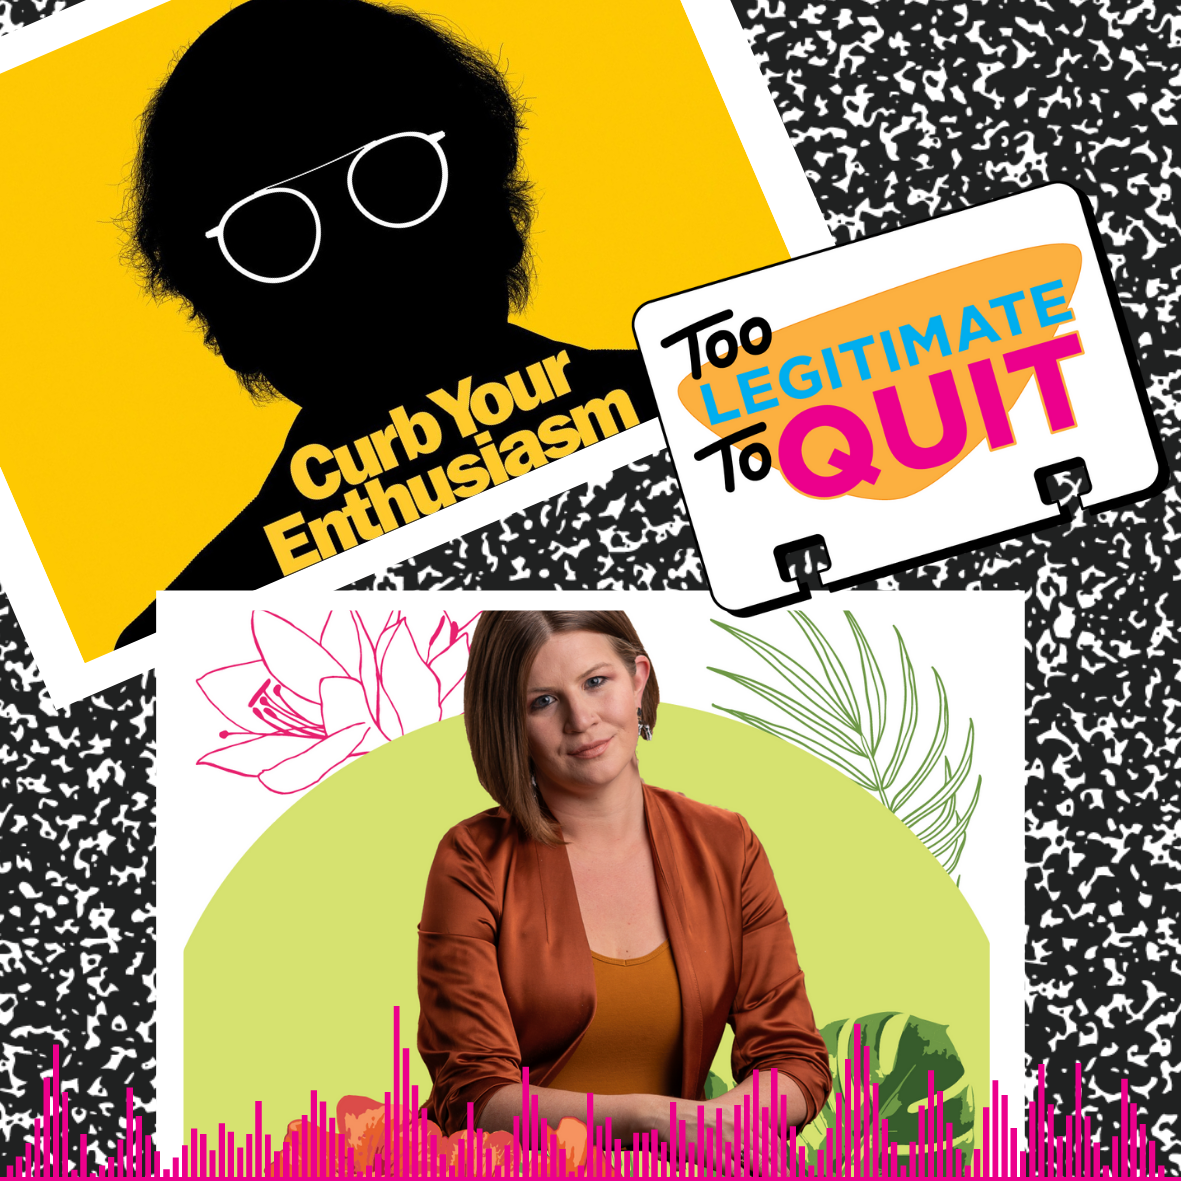 64: On Brand Stories, Self-Talk & Curb Your Enthusiasm (feat. Dana Magnus)